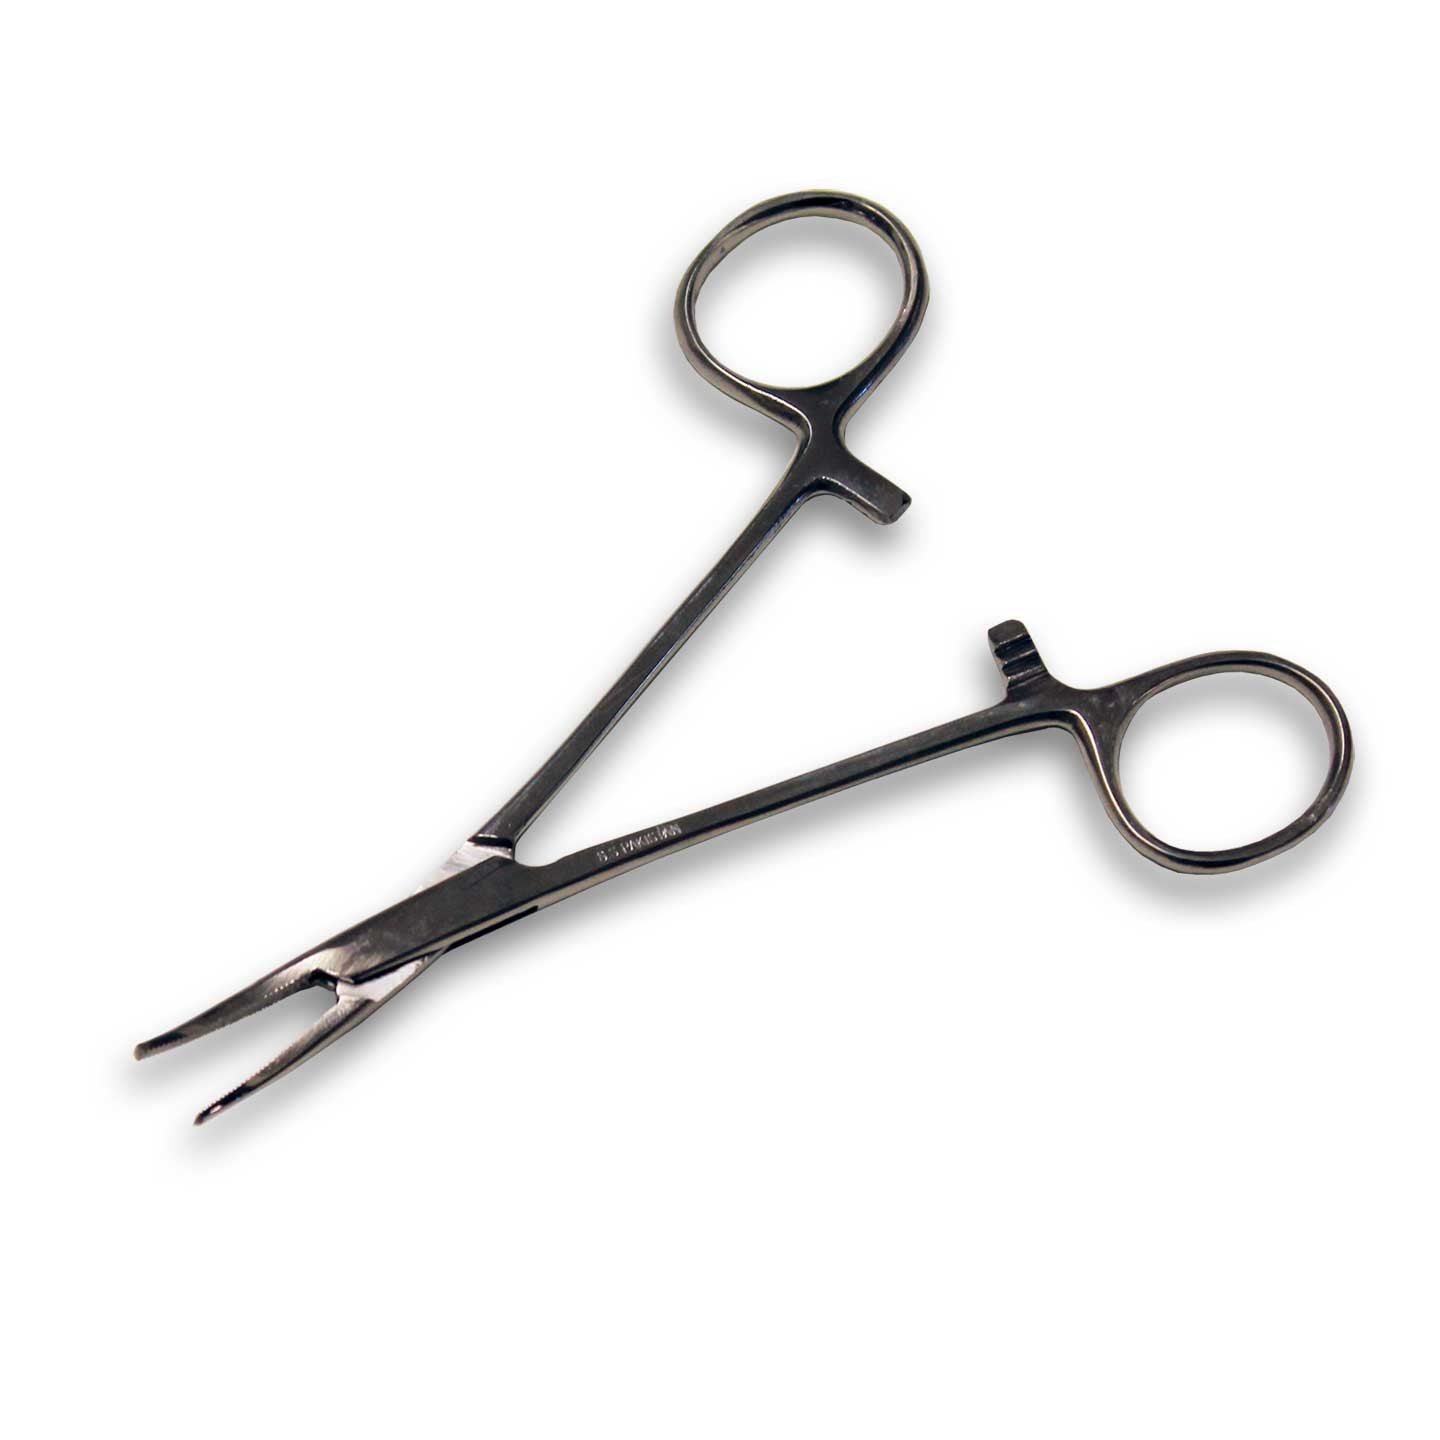 STORE99® Lot of 2 Pieces 16cm Fishing AccessorY Curved Hemostats